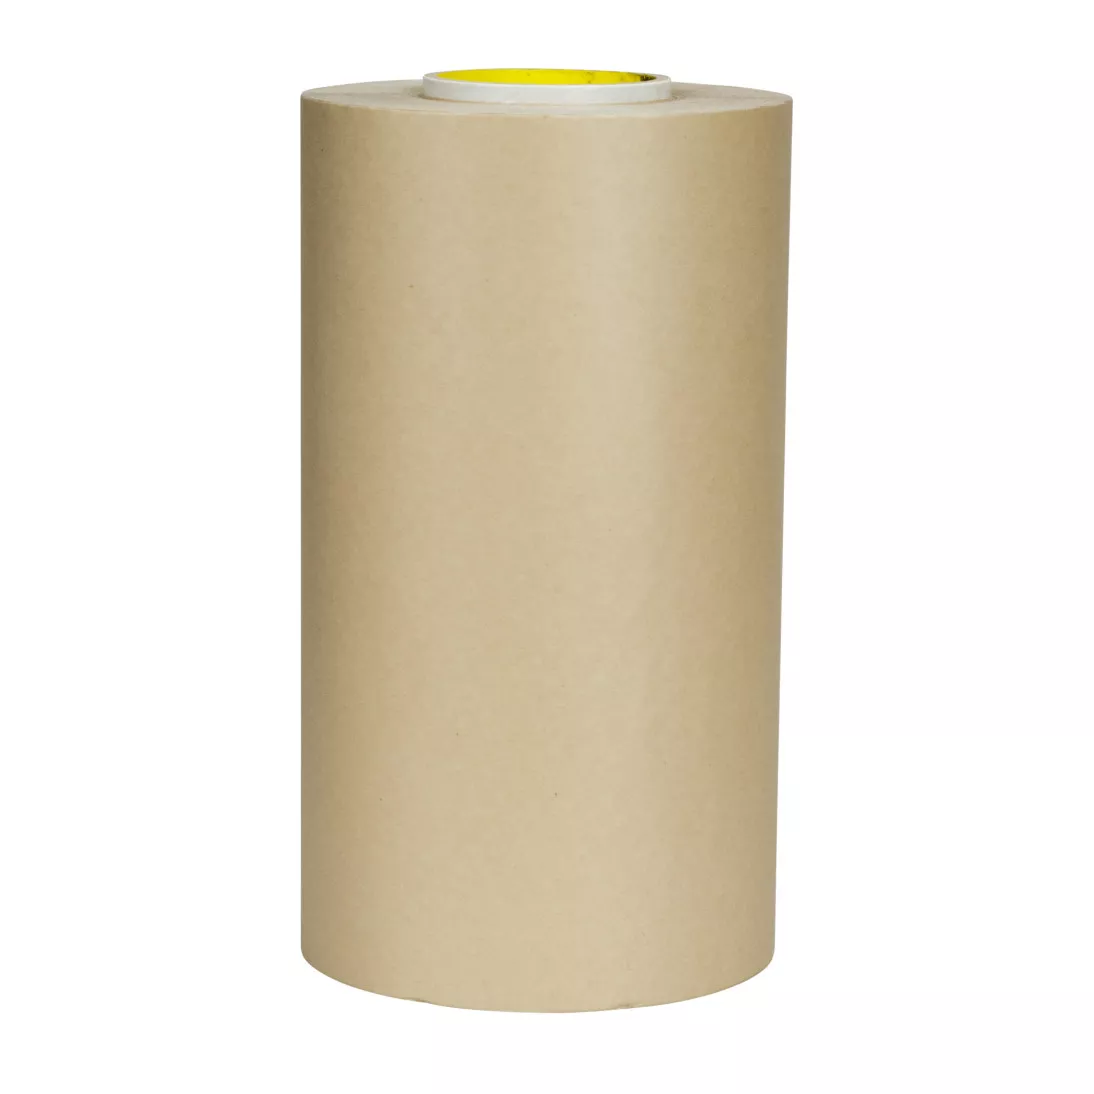 3M™ Adhesive Transfer Tape 6038PC, Clear, 1 in x 60 yd, 8 mil, 9 rolls
per case